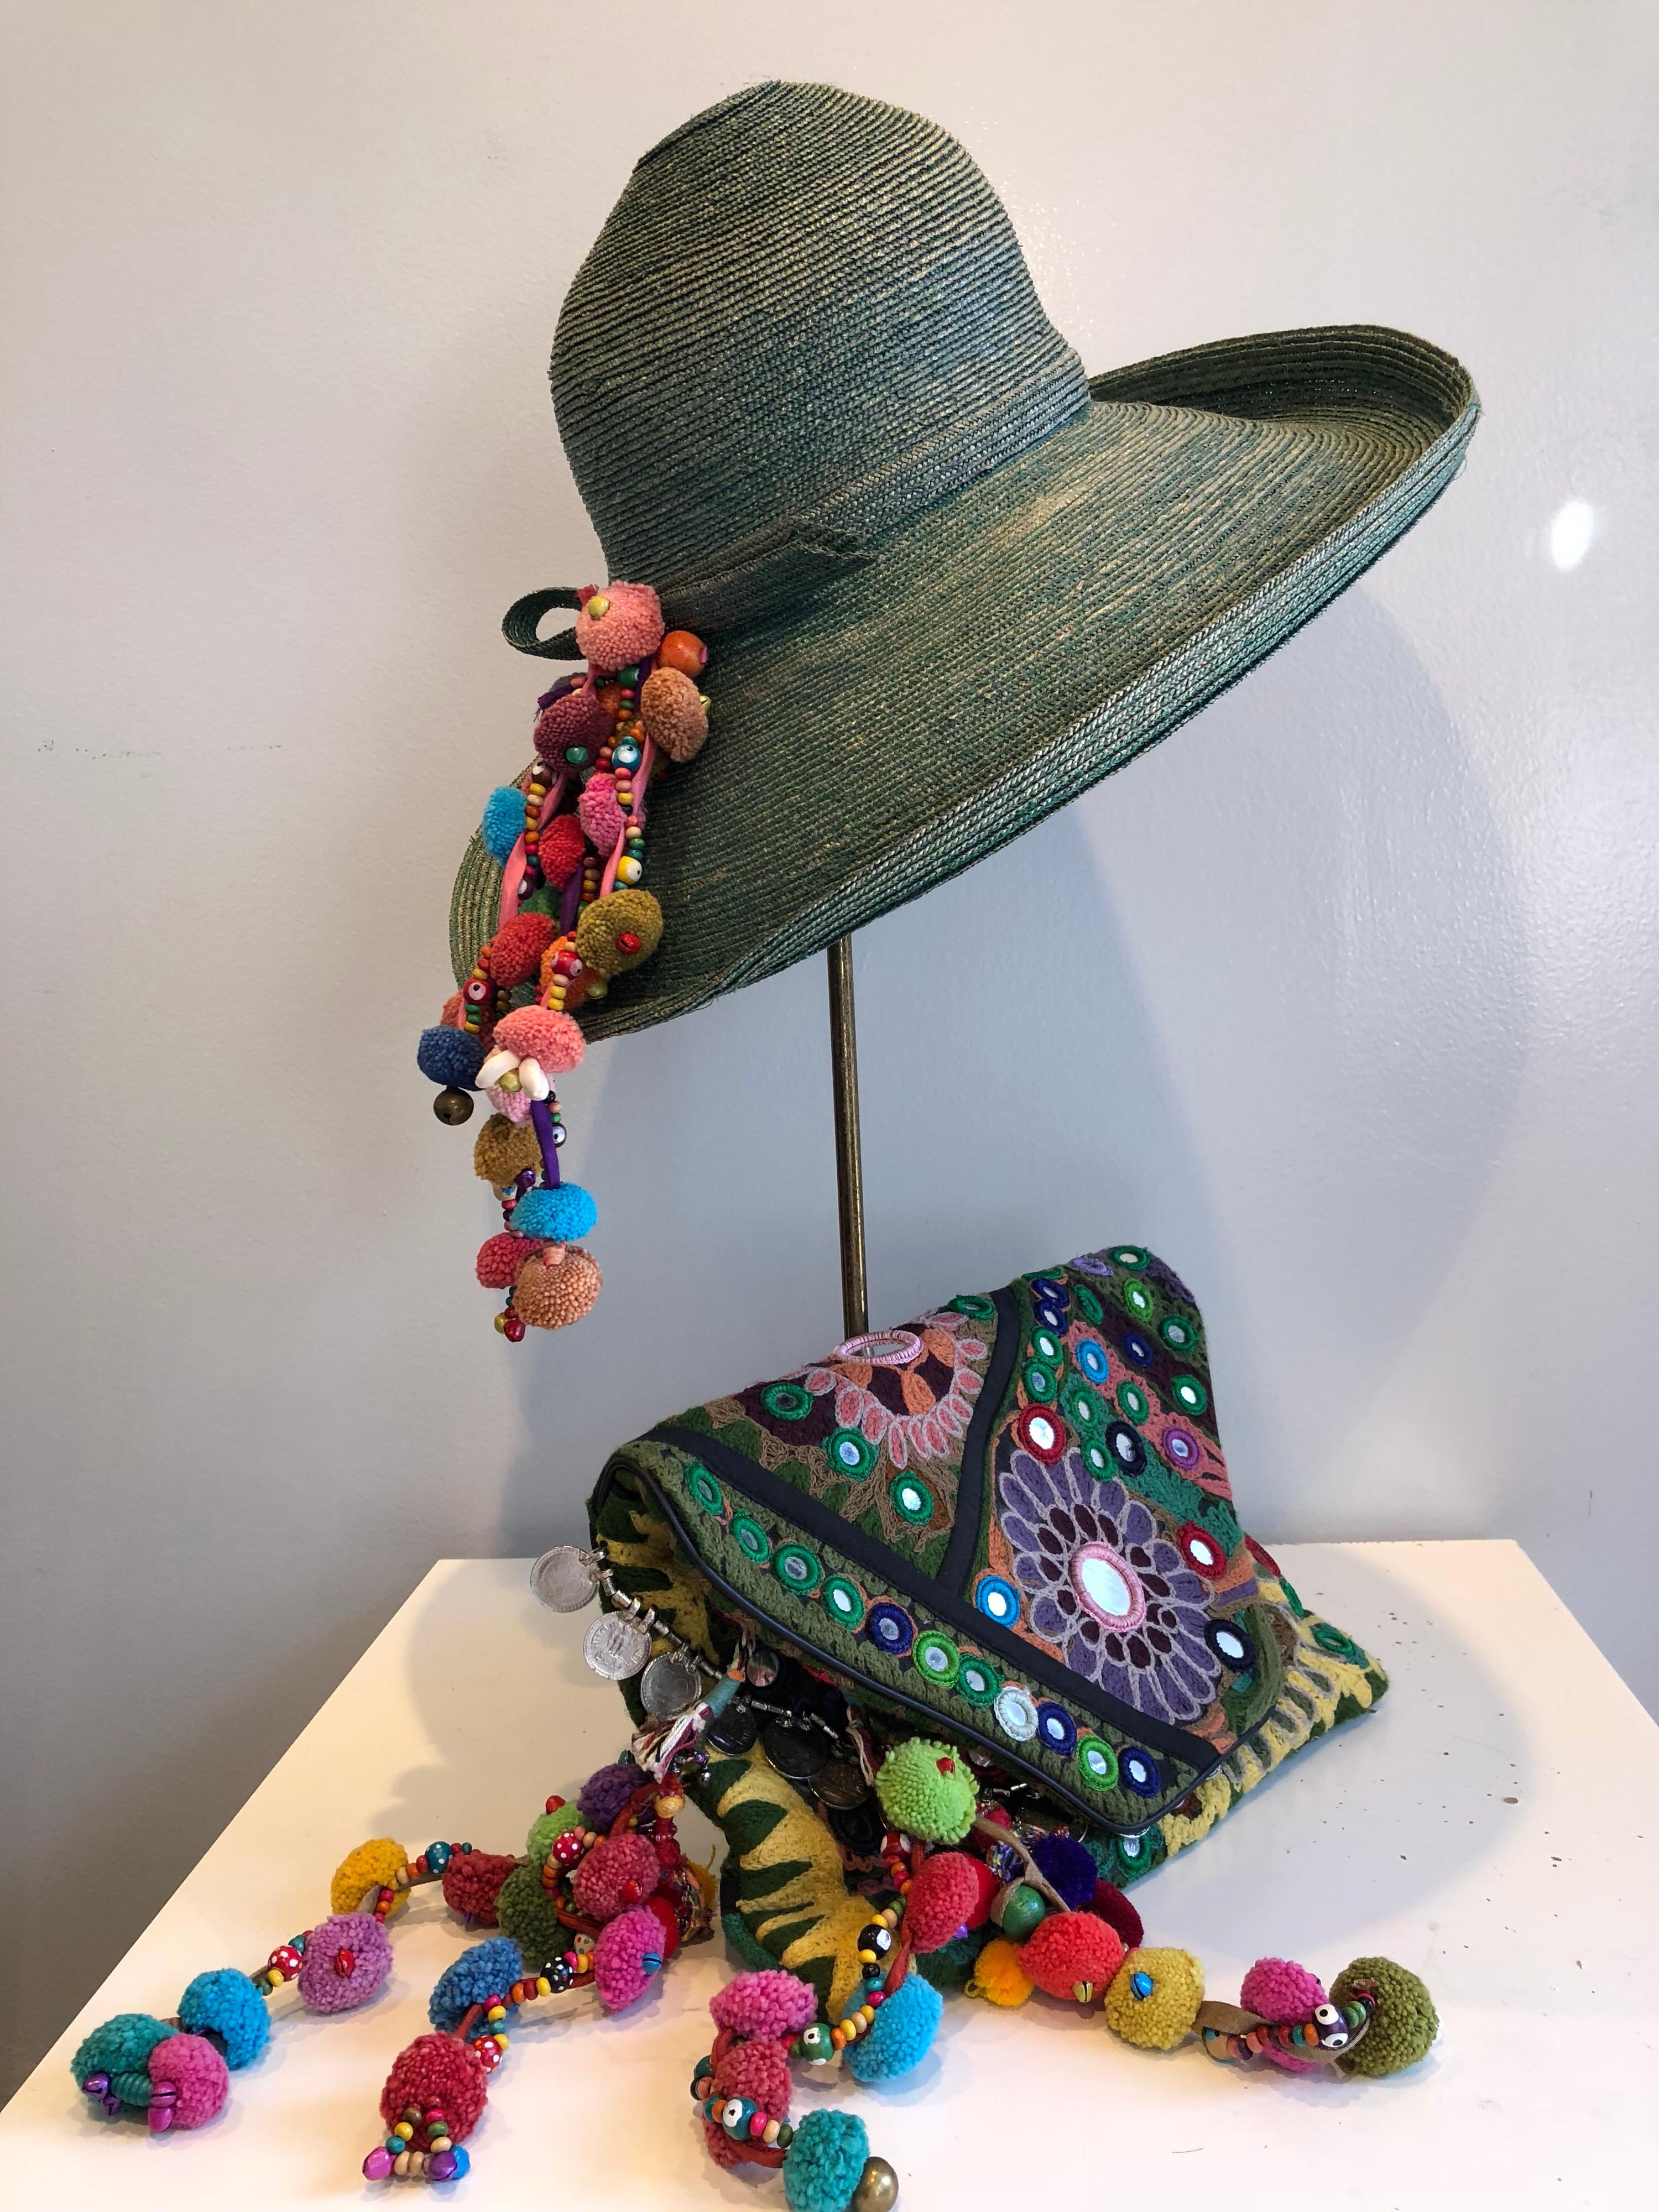 1960s Frank Olive Jade Green Straw Hat & Moroccan Textile Boho Clutch 12